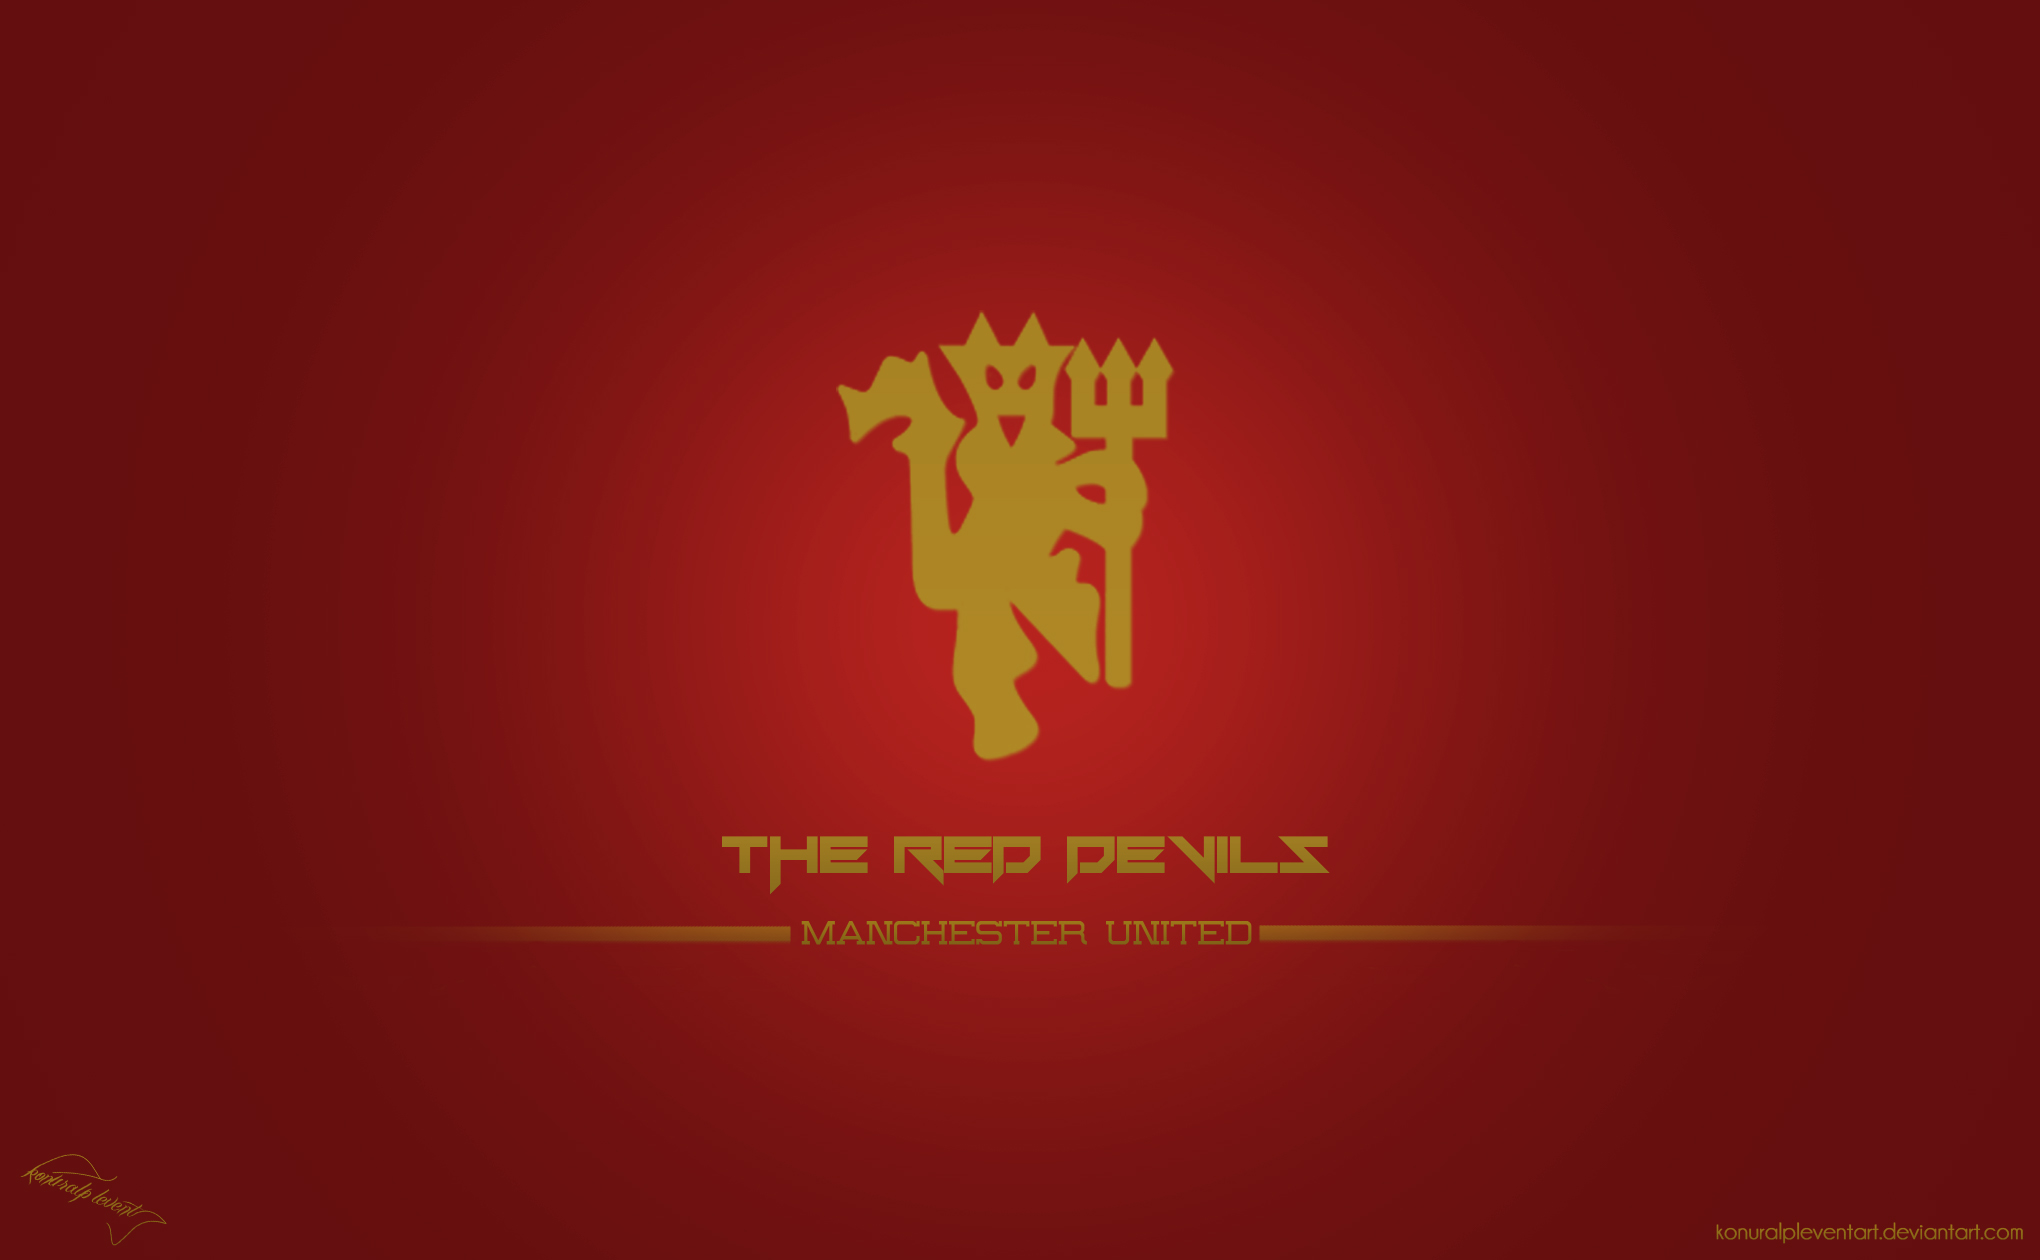 The Red Devils 13